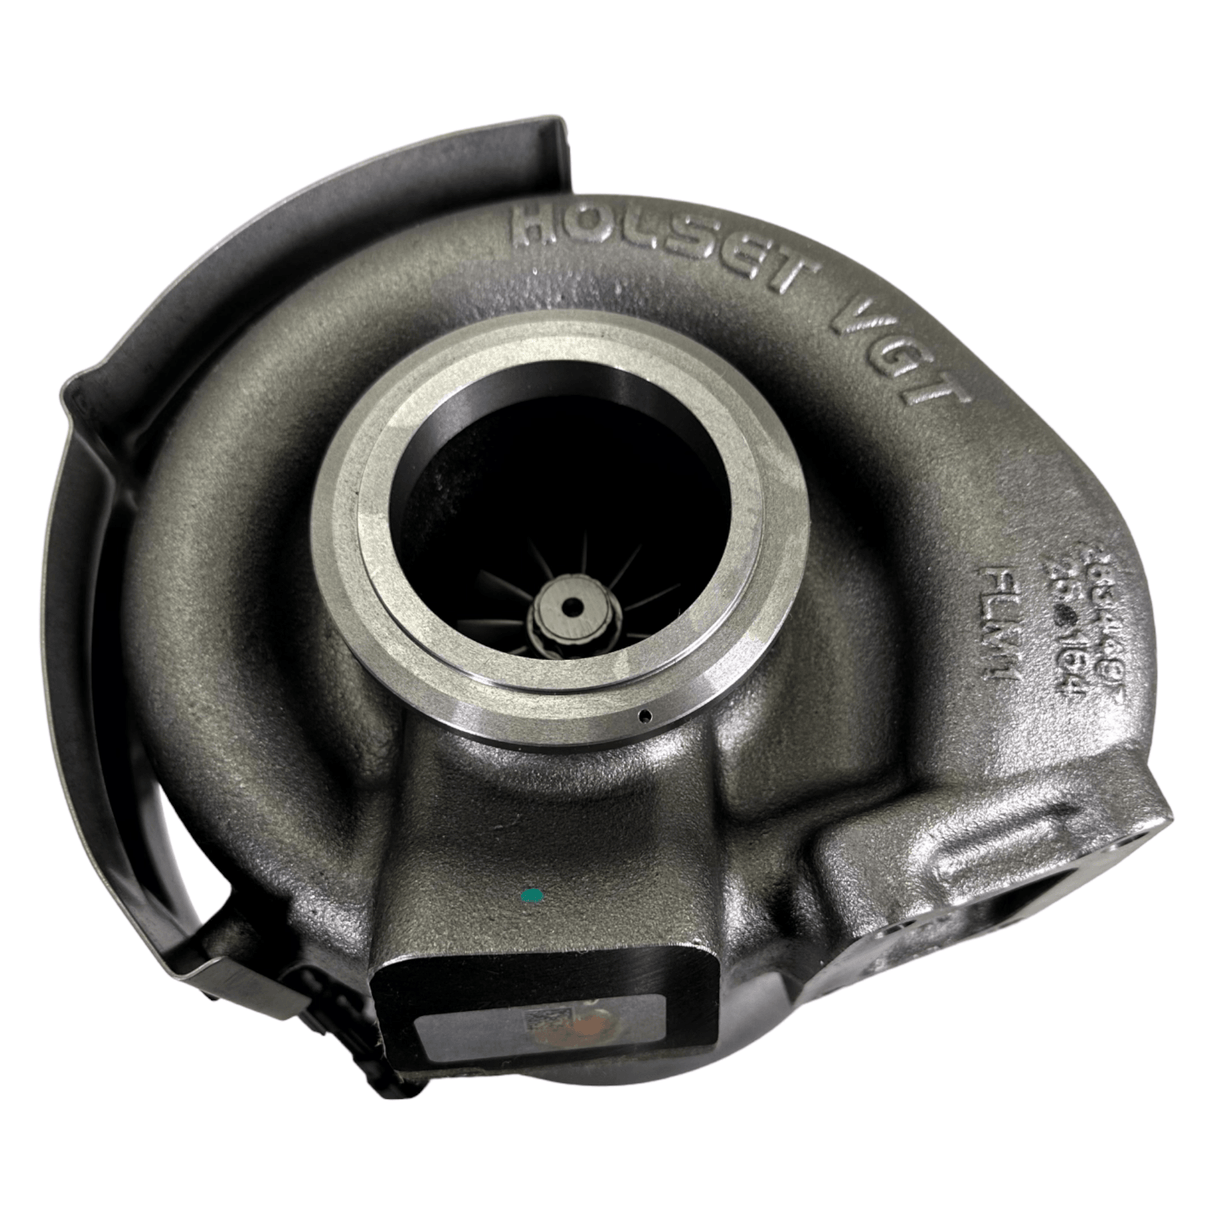 3798327Rx Genuine Cummins Turbocharger Kit He351Ve For Isb 6.7L - Truck To Trailer